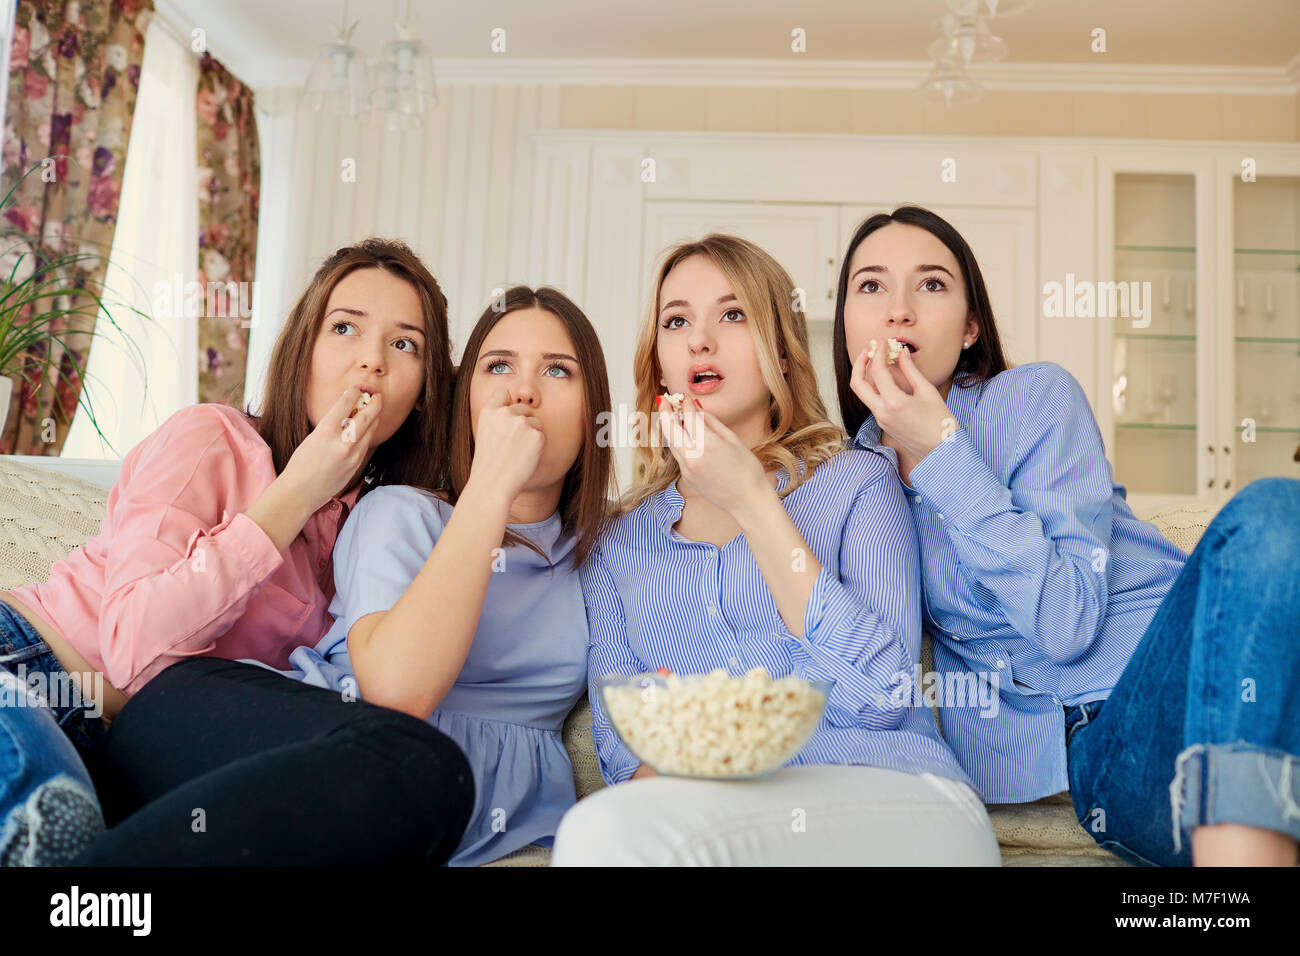 Young girls watching TV, eating popcorn sitting on the couch. Stock Photo